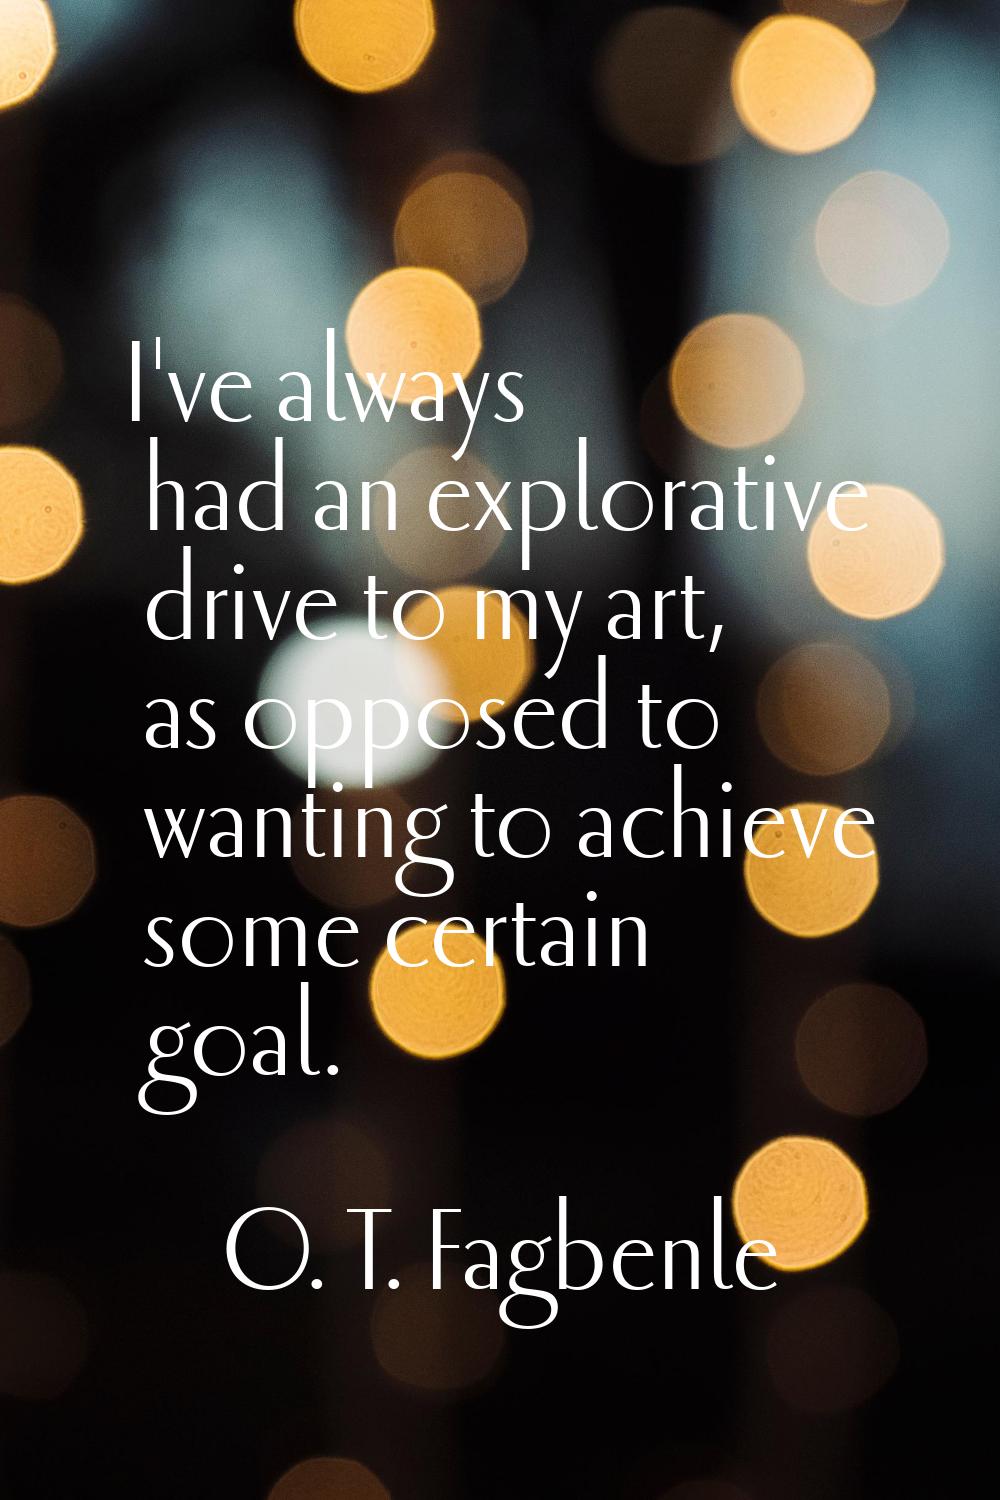 I've always had an explorative drive to my art, as opposed to wanting to achieve some certain goal.